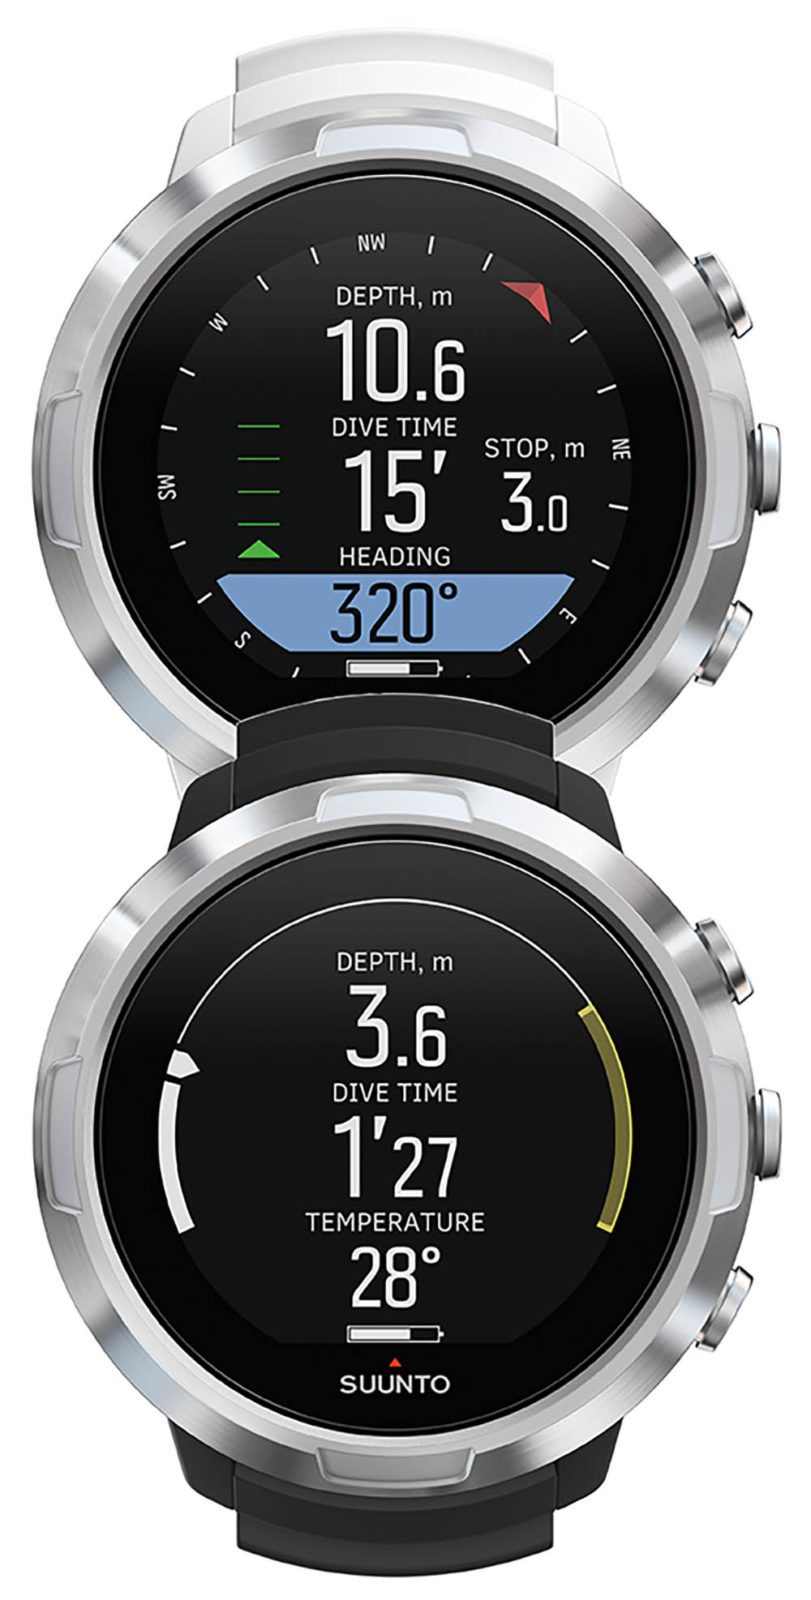 Compass view and freediving mode